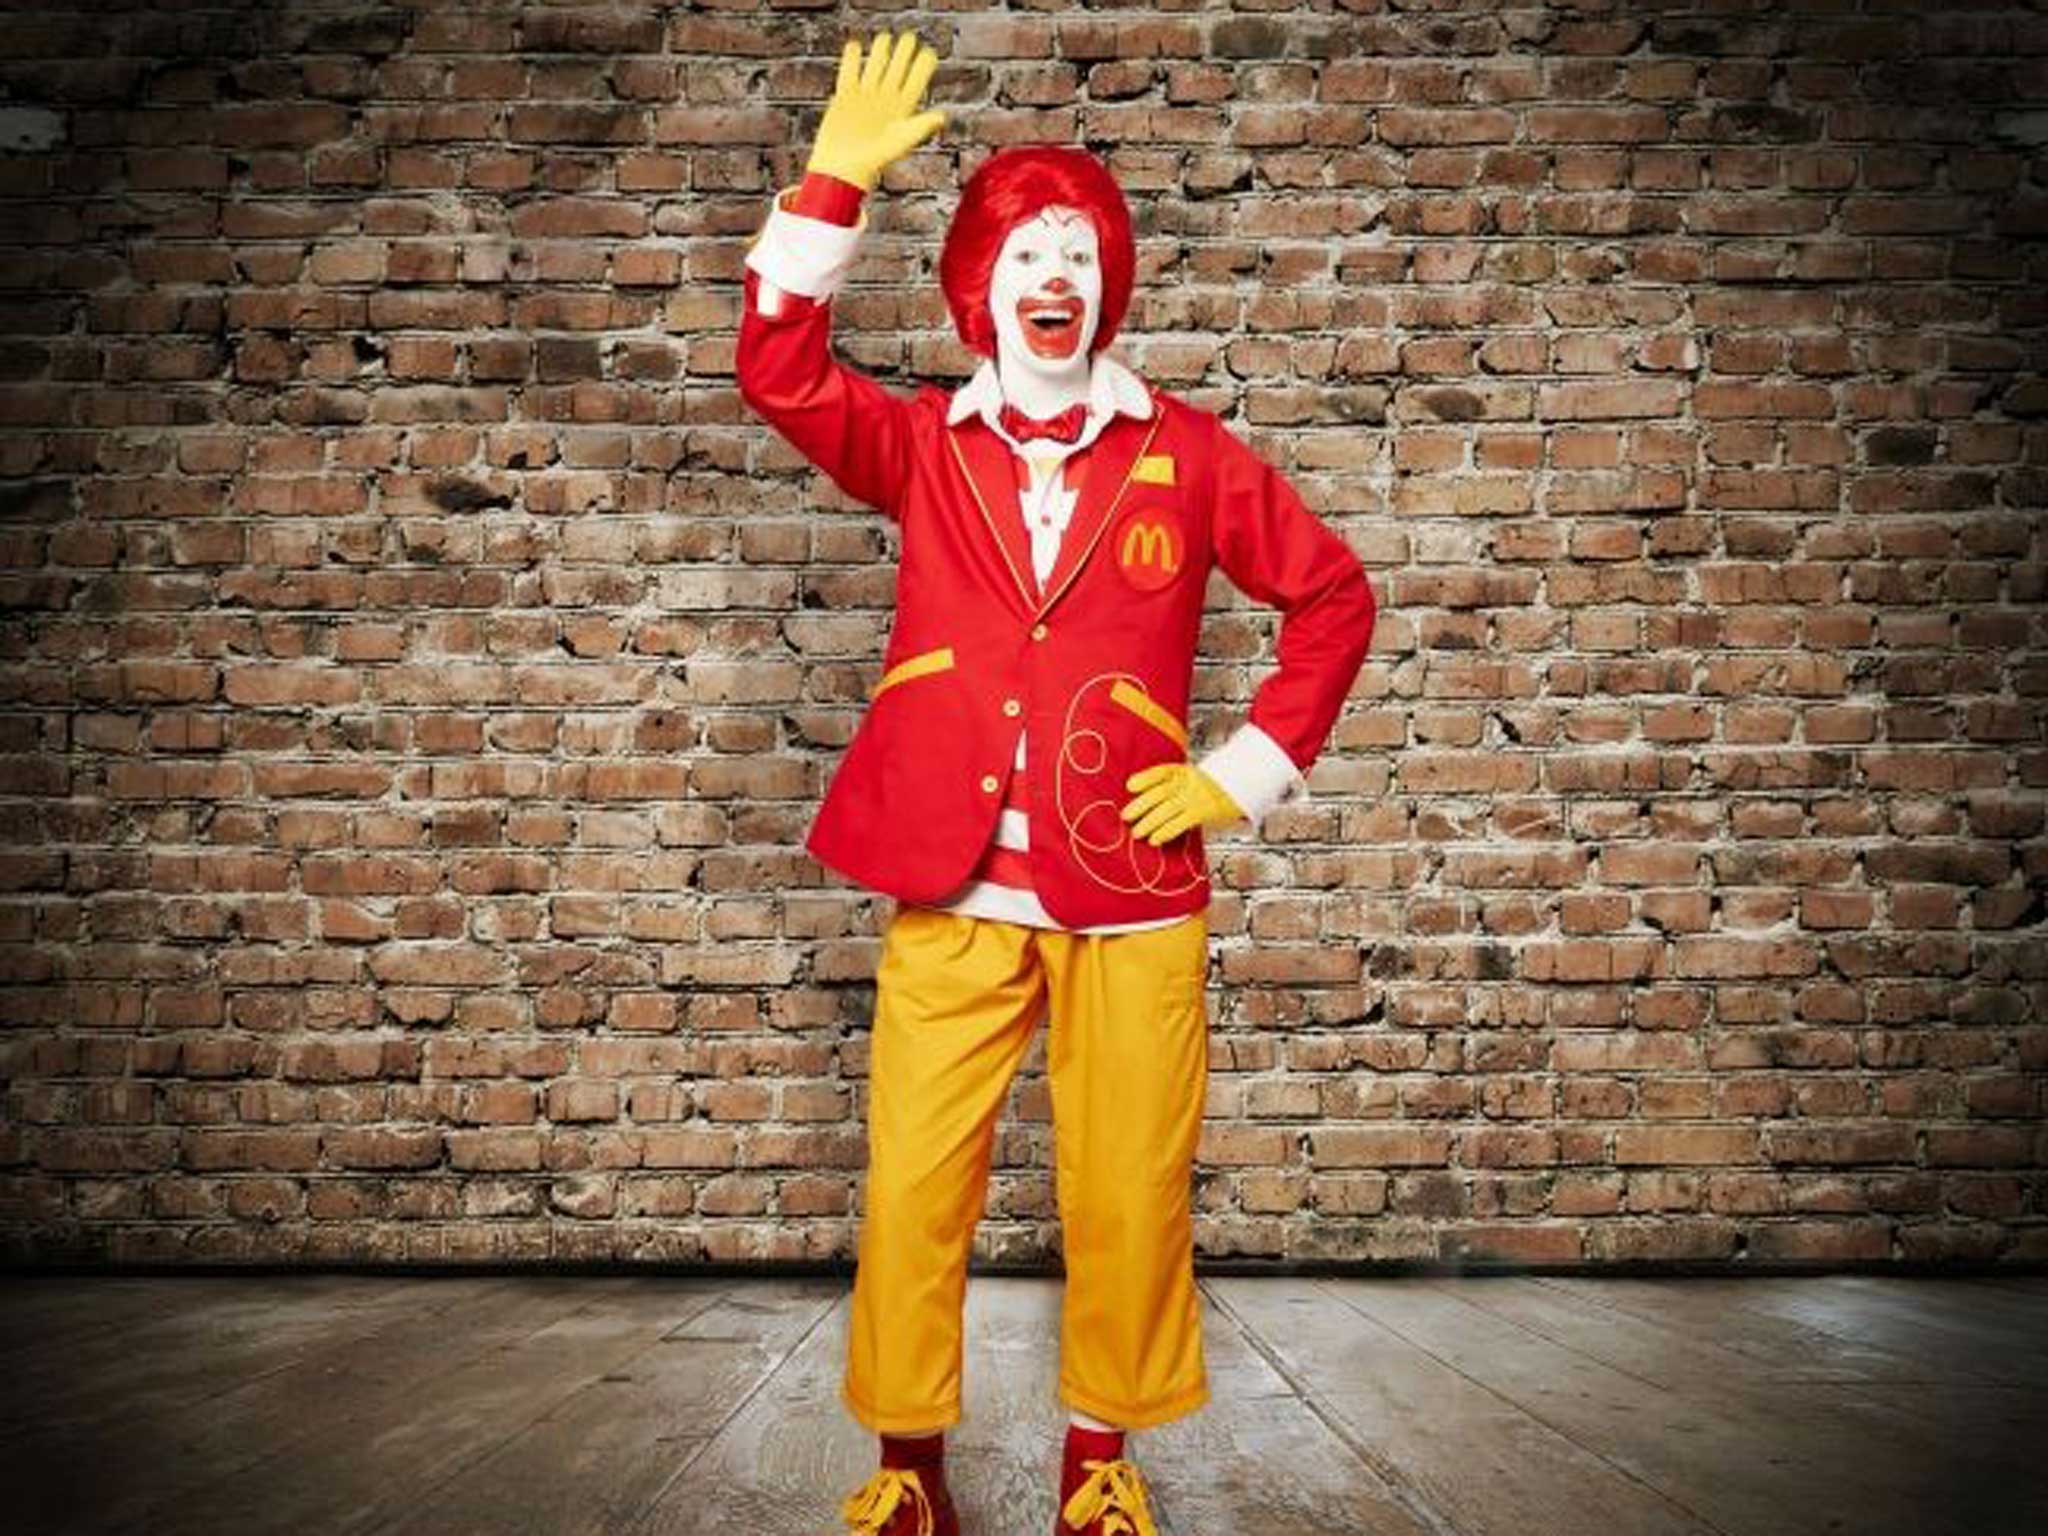 It's hoped Ronald McDonald's new image will eclipse the old